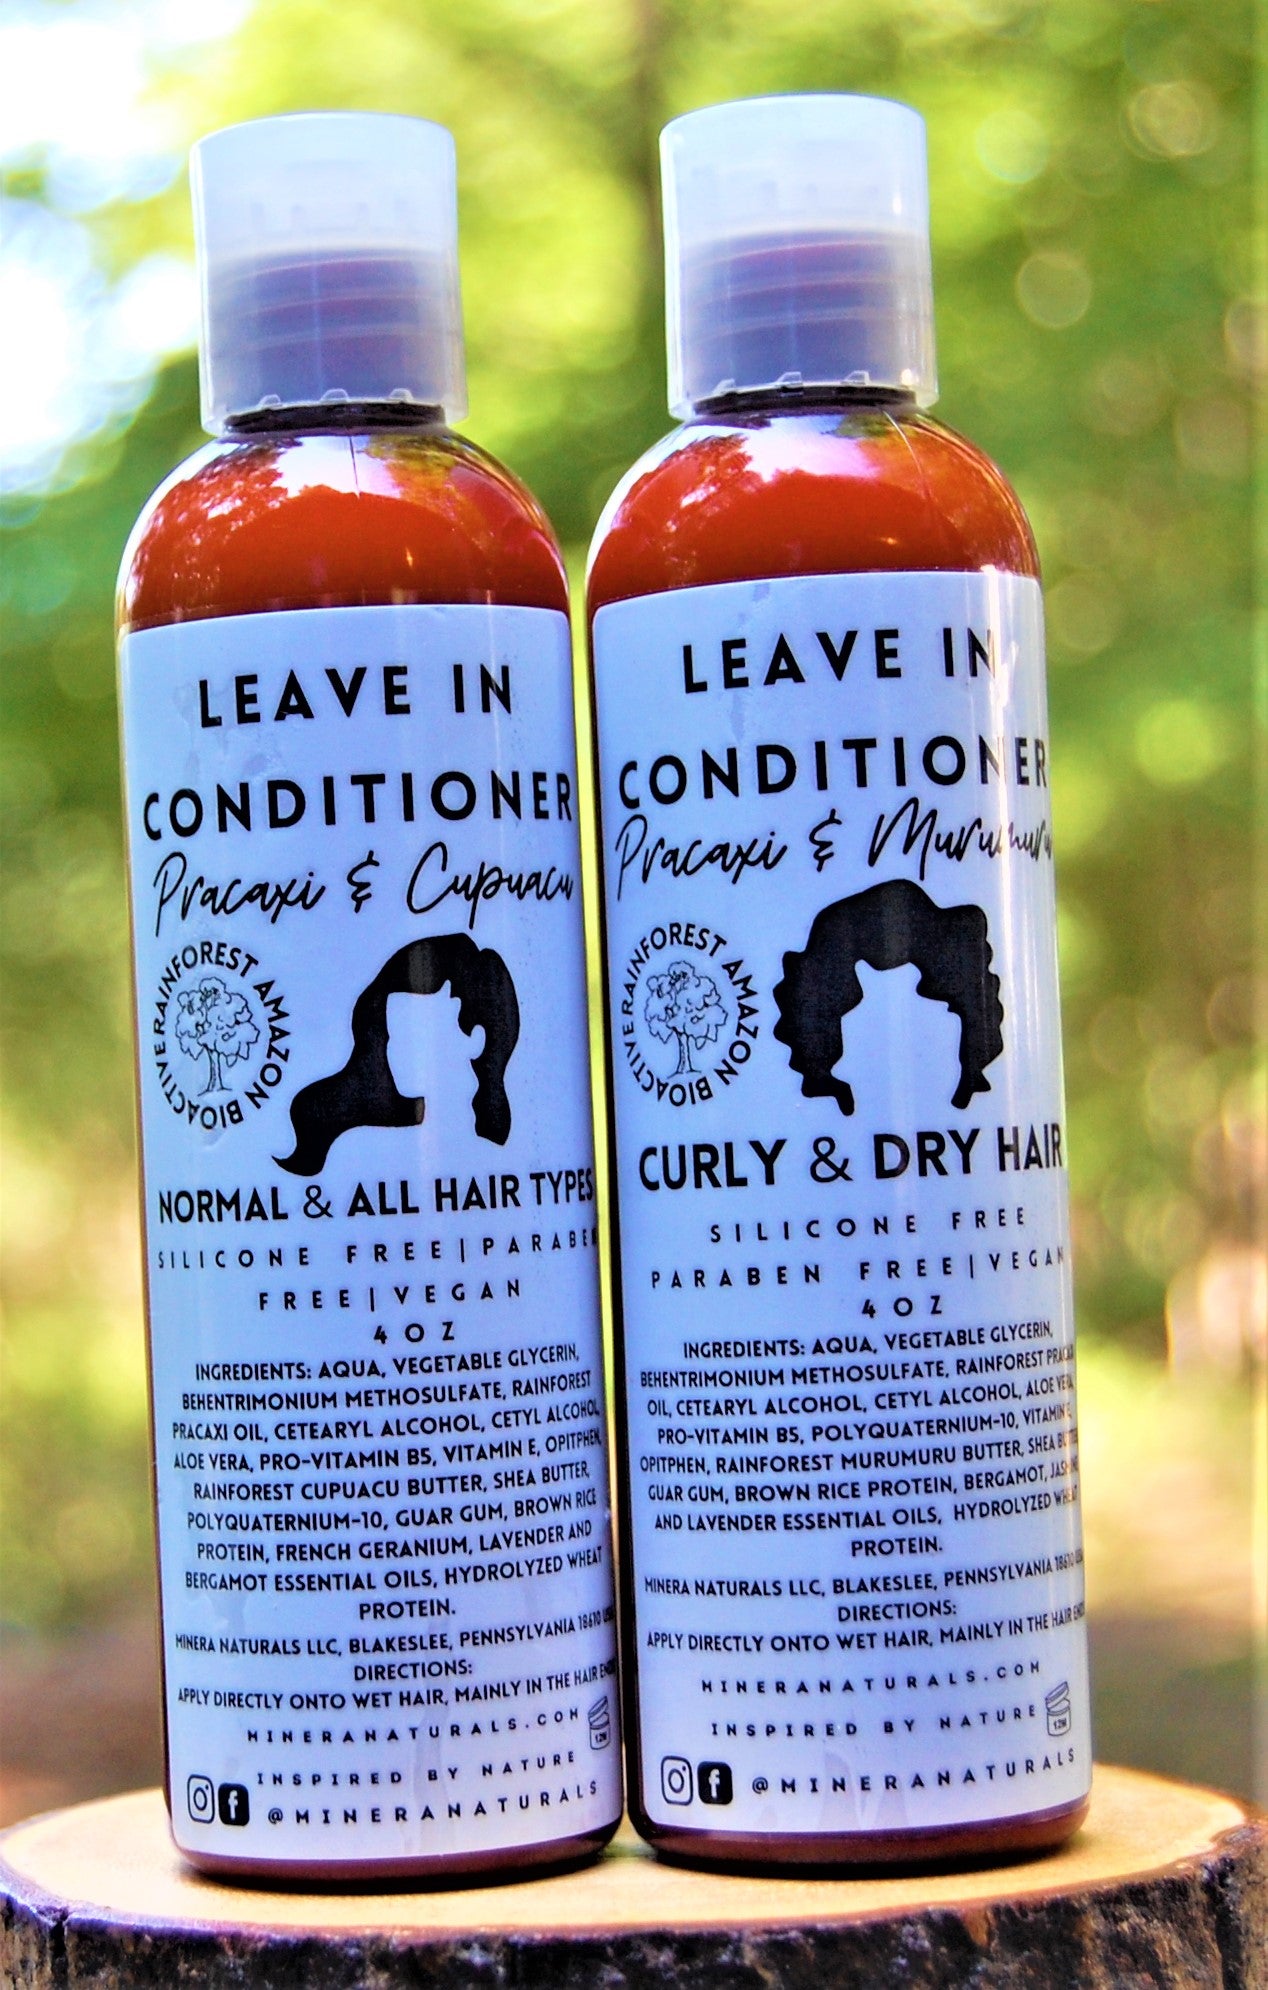 Leave in Conditioner - Curly & Dry Hair